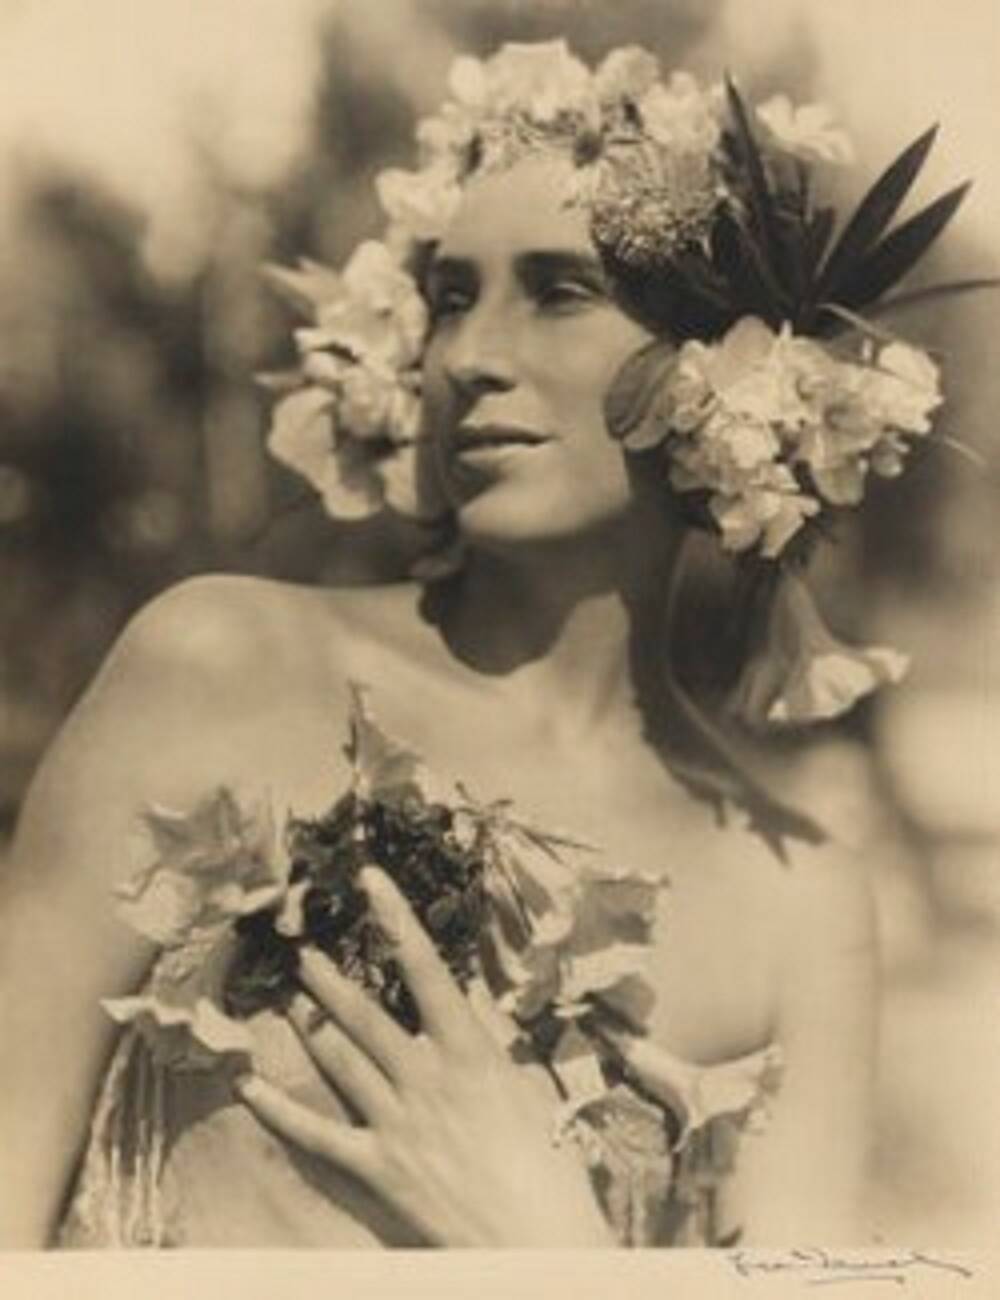 A sepia-tinged photograph of a young woman, holding flowers against her chest. She is wearing a strapless dress and also wears a garland of flowers in her hair.